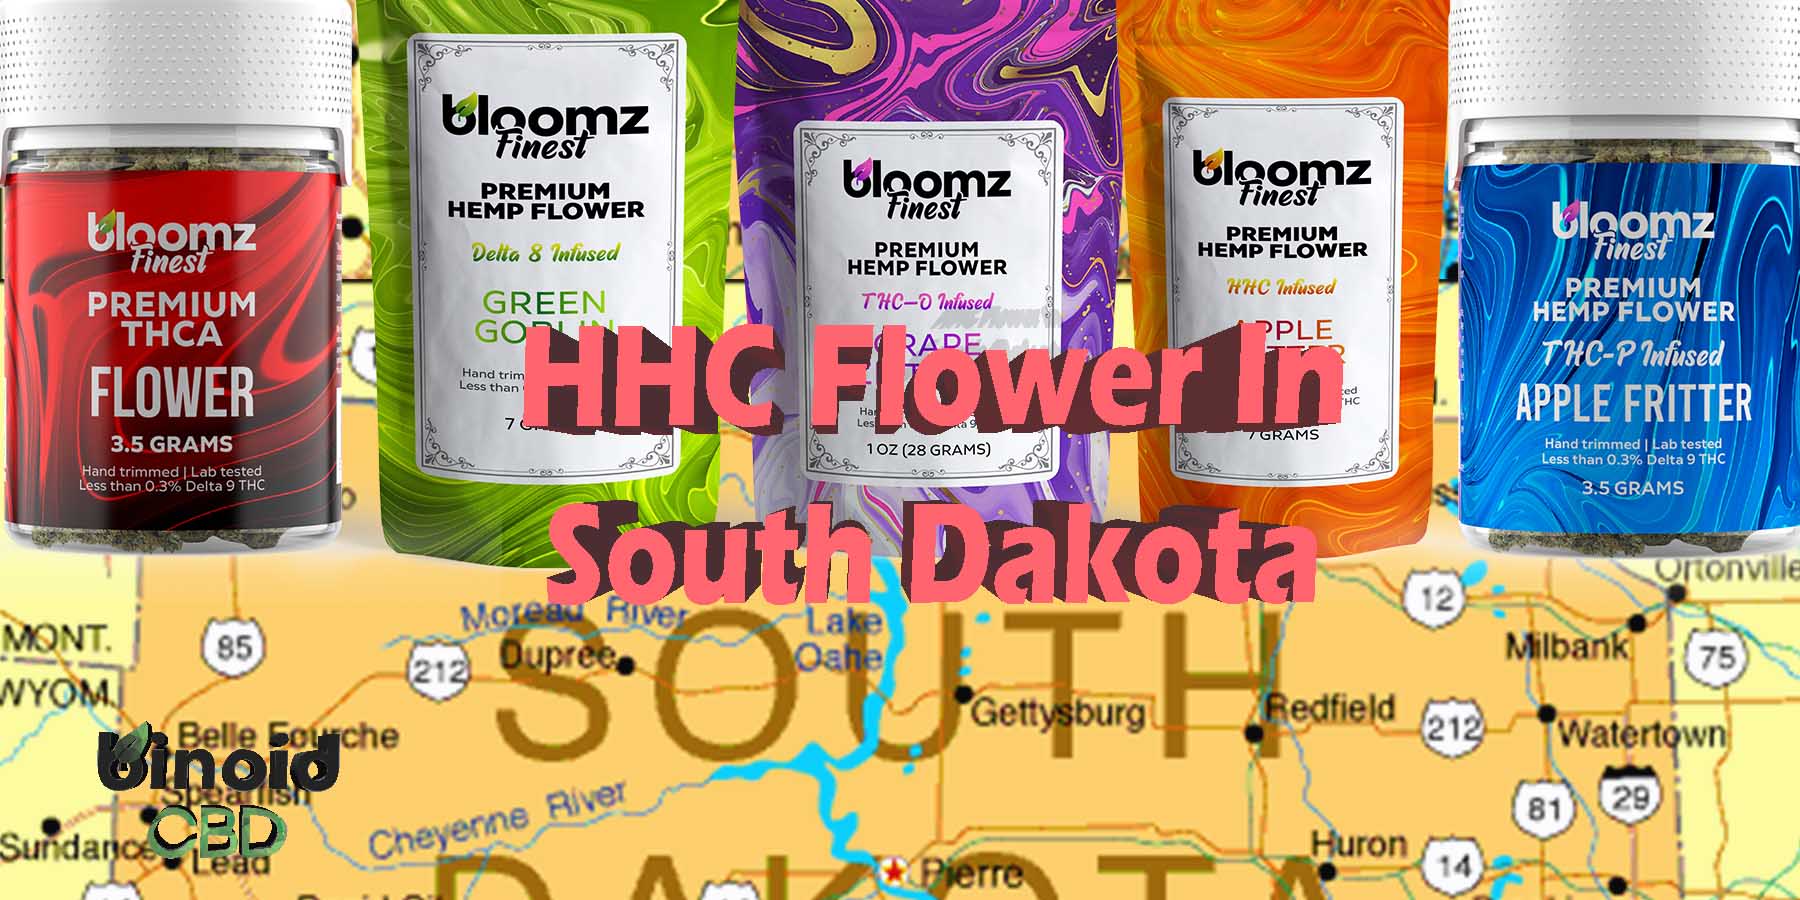 HHC Flower In South Dakota Where To Buy HHC Flower In South Dakota What Is HHC Flower Where Is It Actually Legal HHC Flower How To Buy HHC